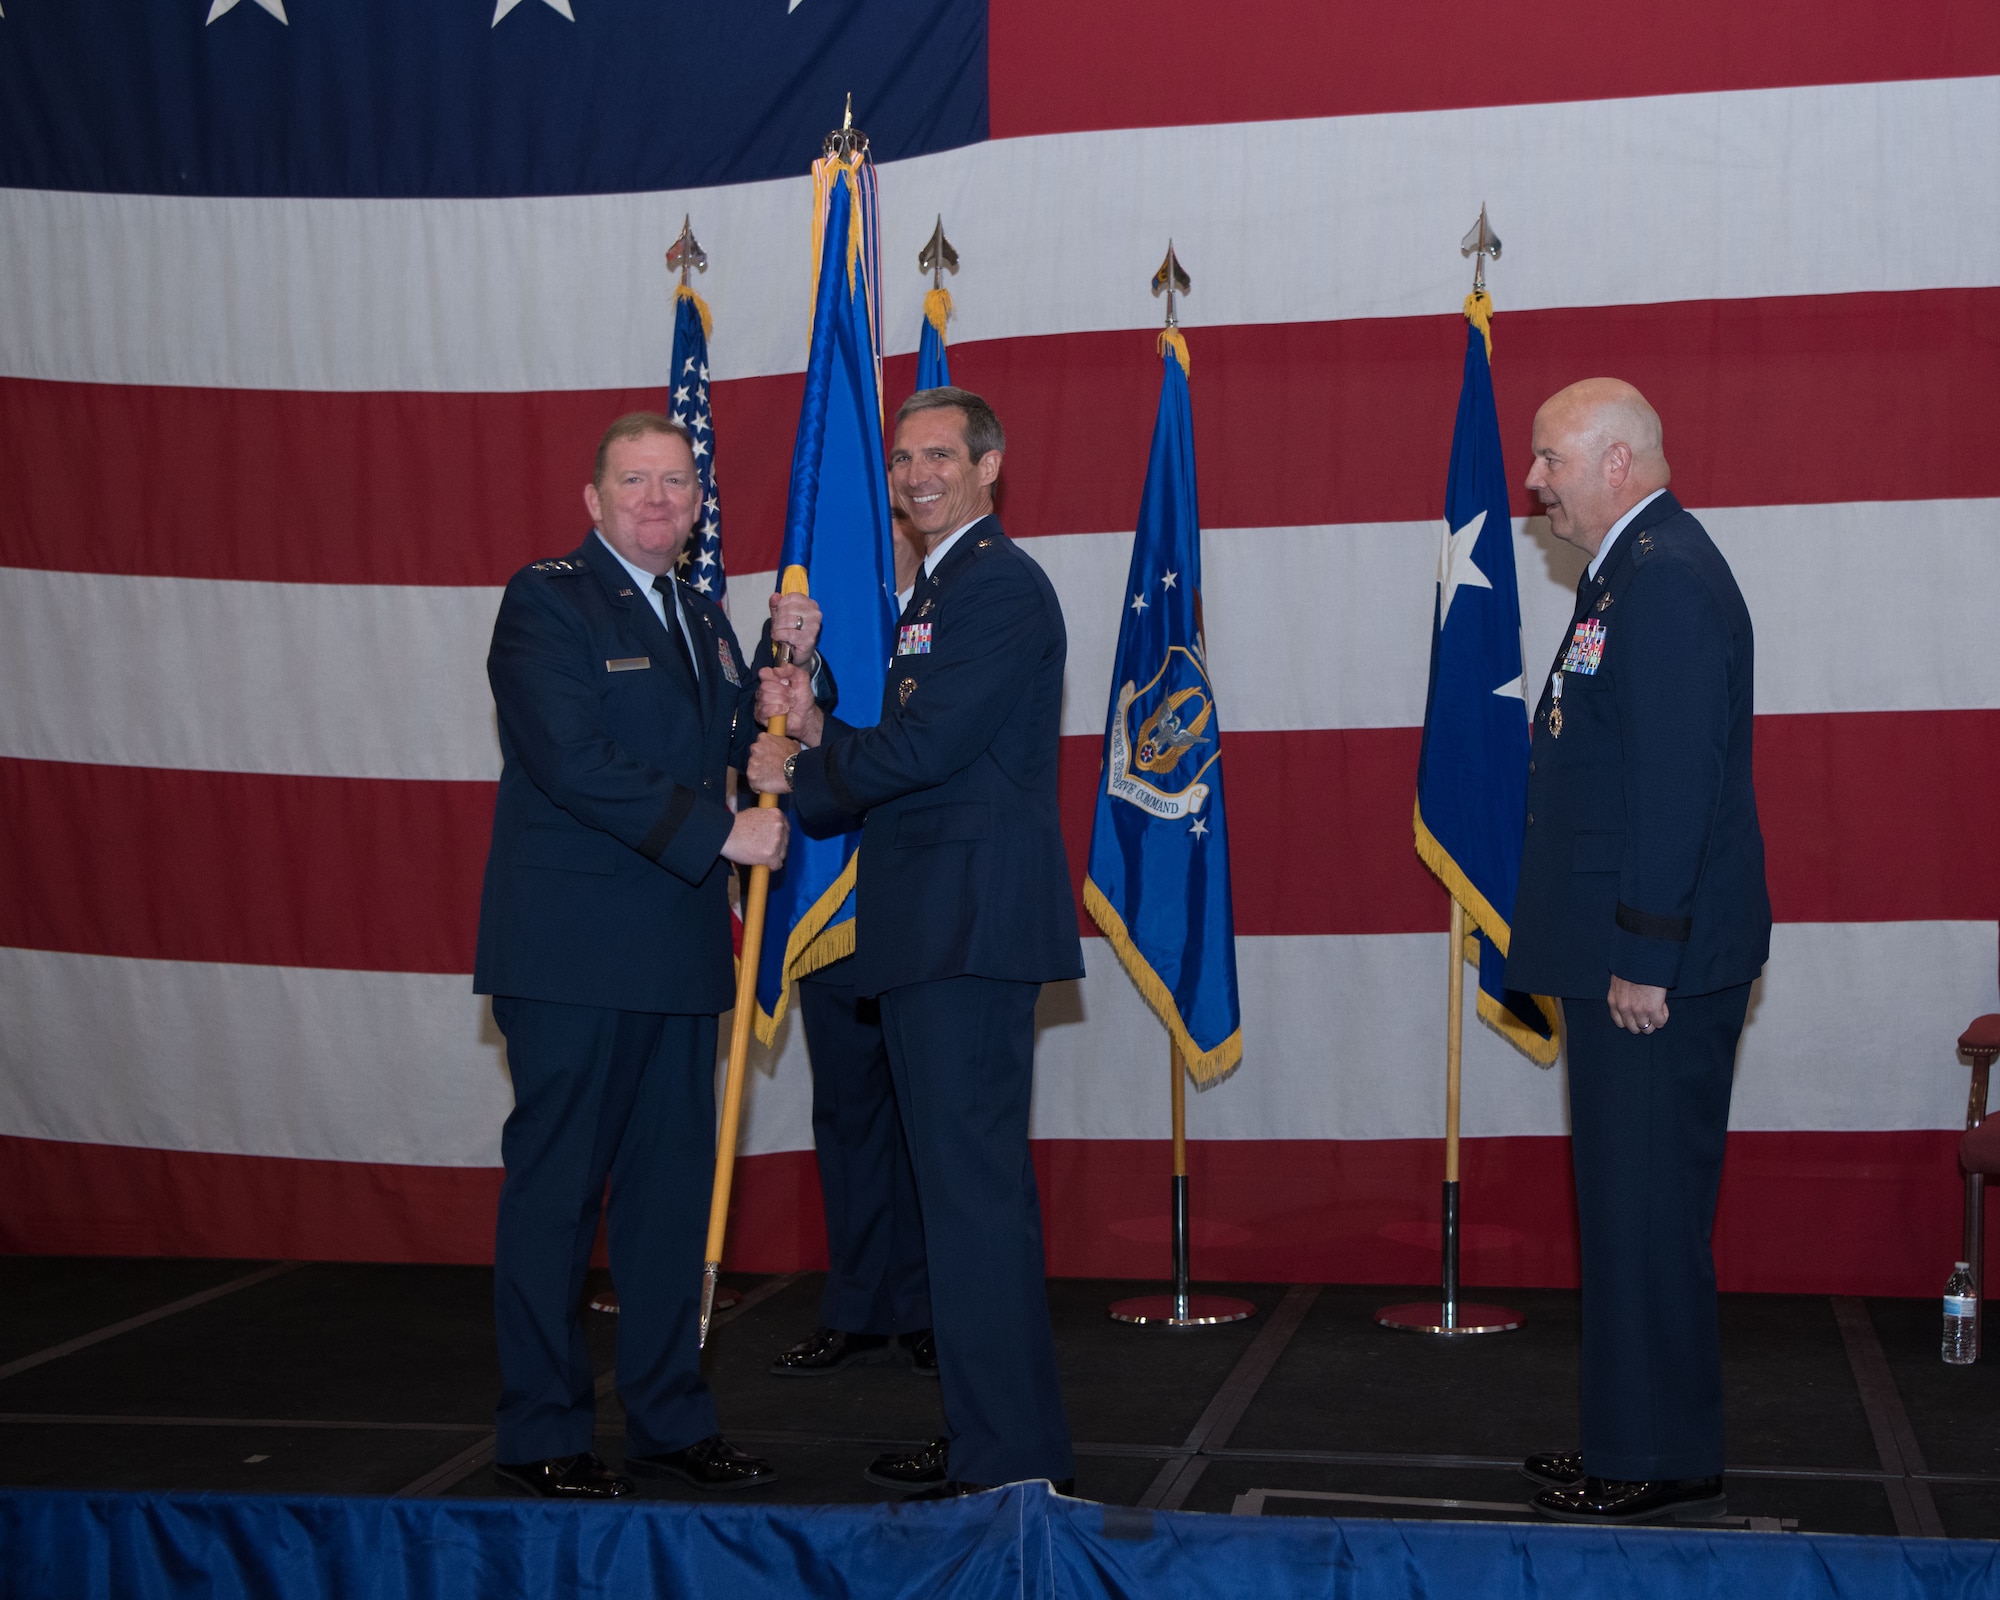 Lt. Gen. Richard Scobee and Maj. Gen. Bryan Radliff pause for a picture during the passing of the Tenth Air Force unit colors, signifying the change of command.